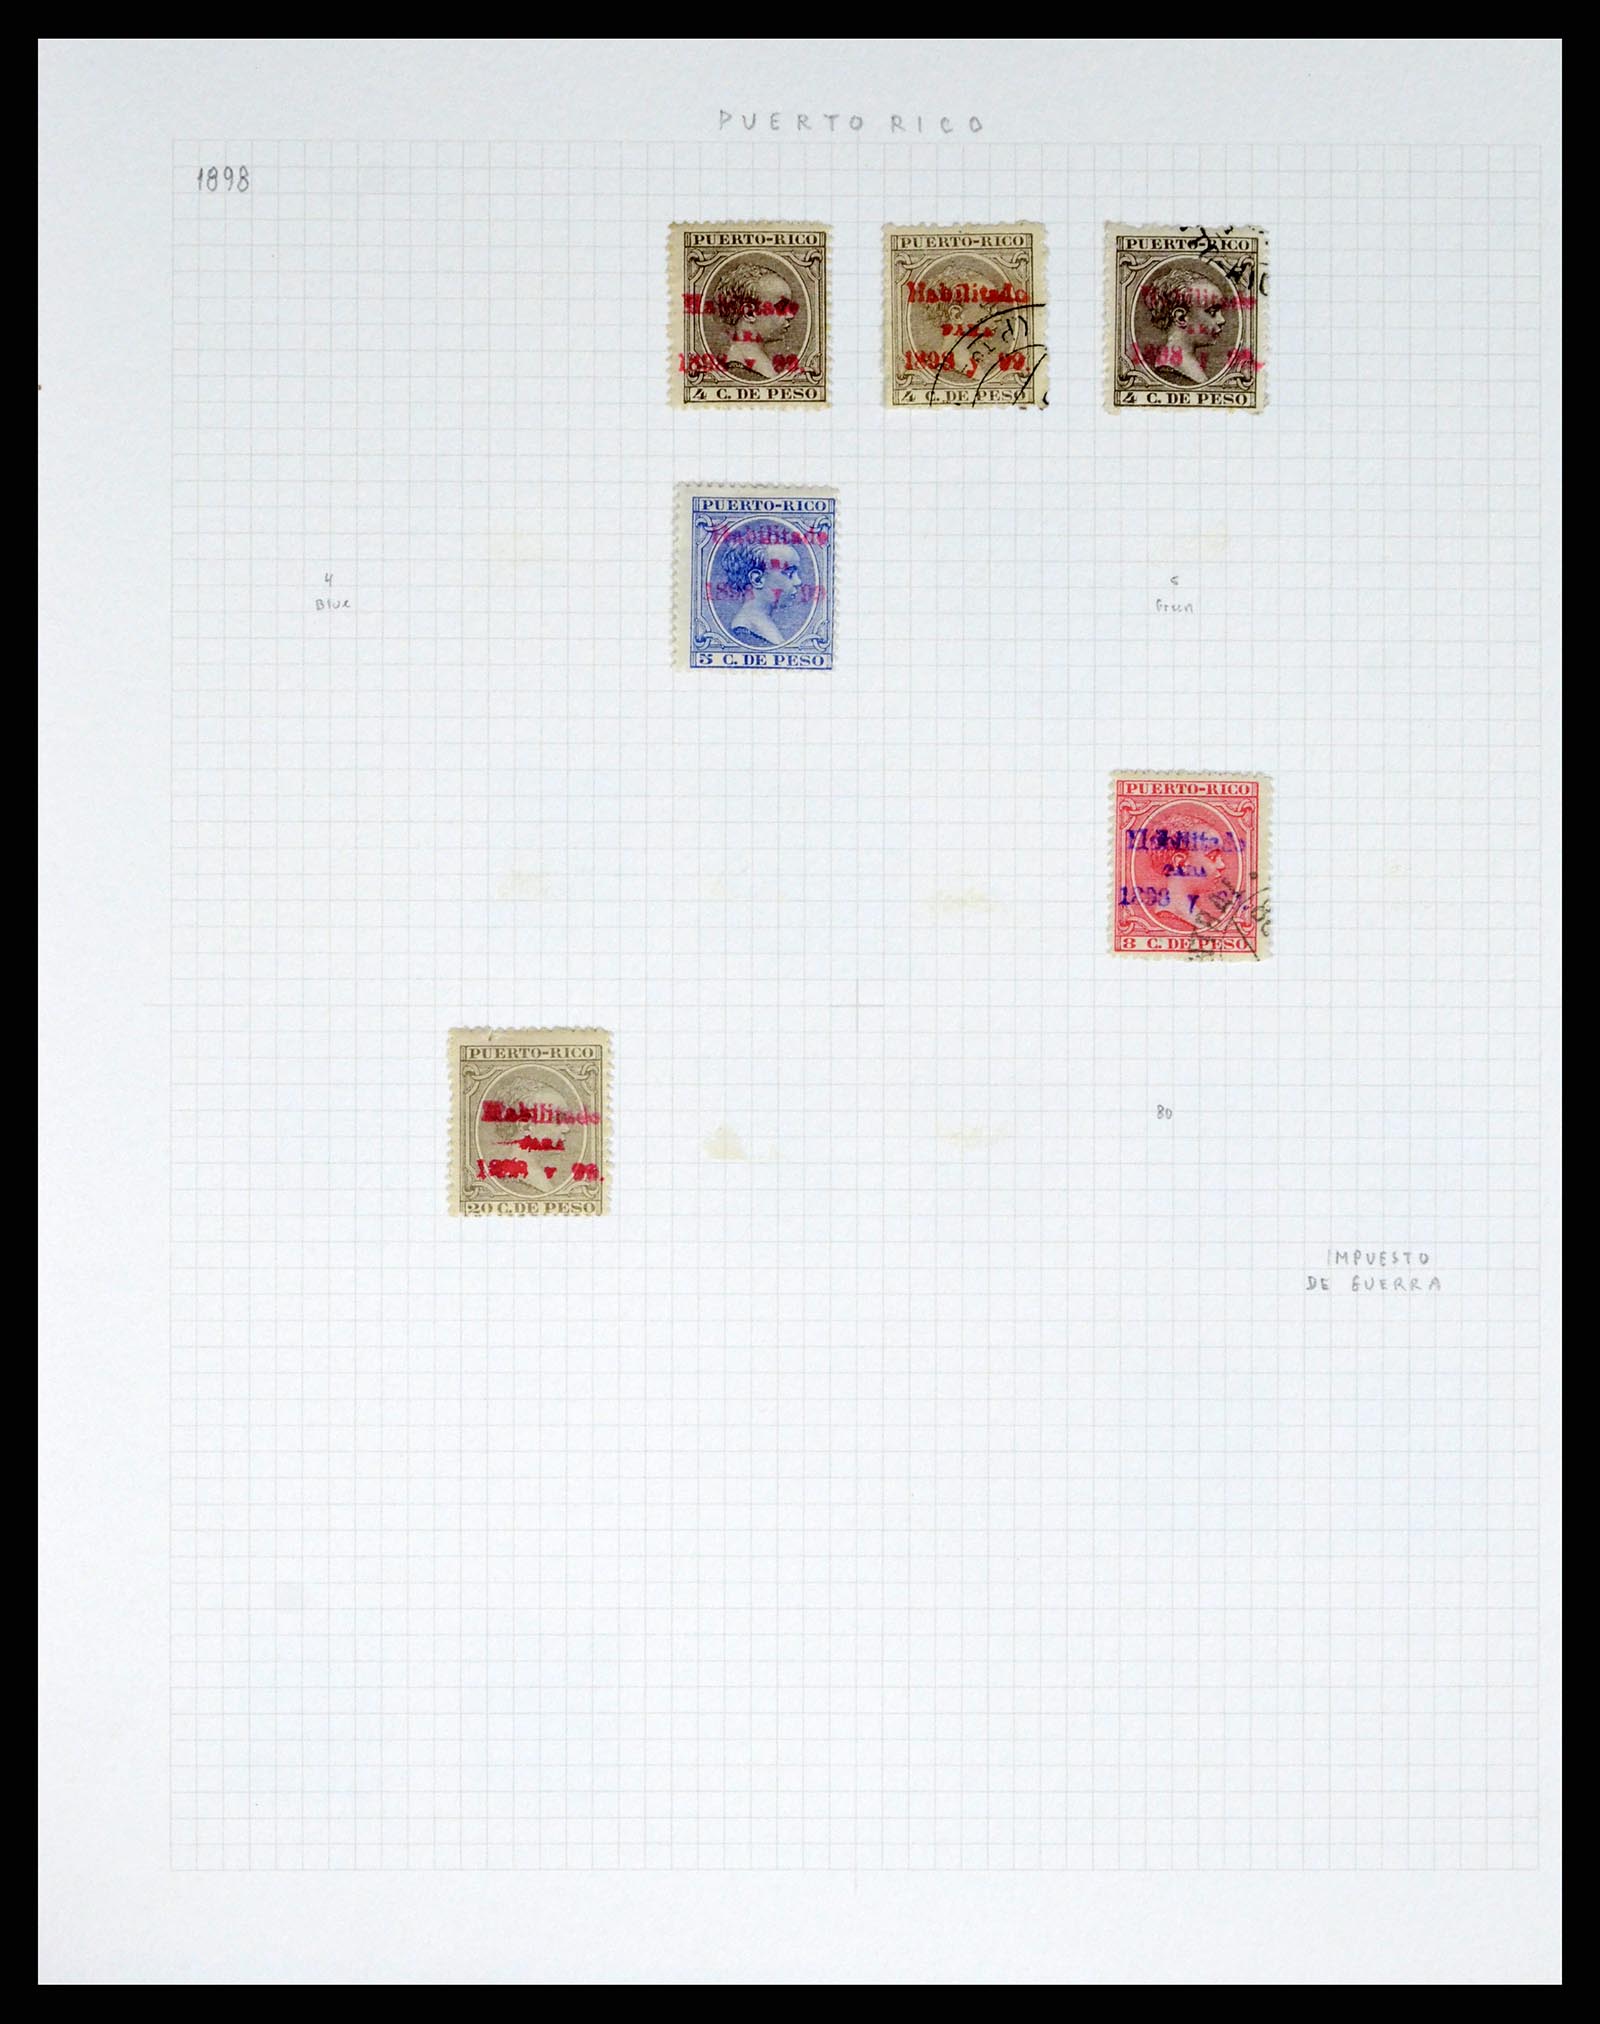 38191 0017 - Stamp collection 38191 Puerto Rico 1855-1900.